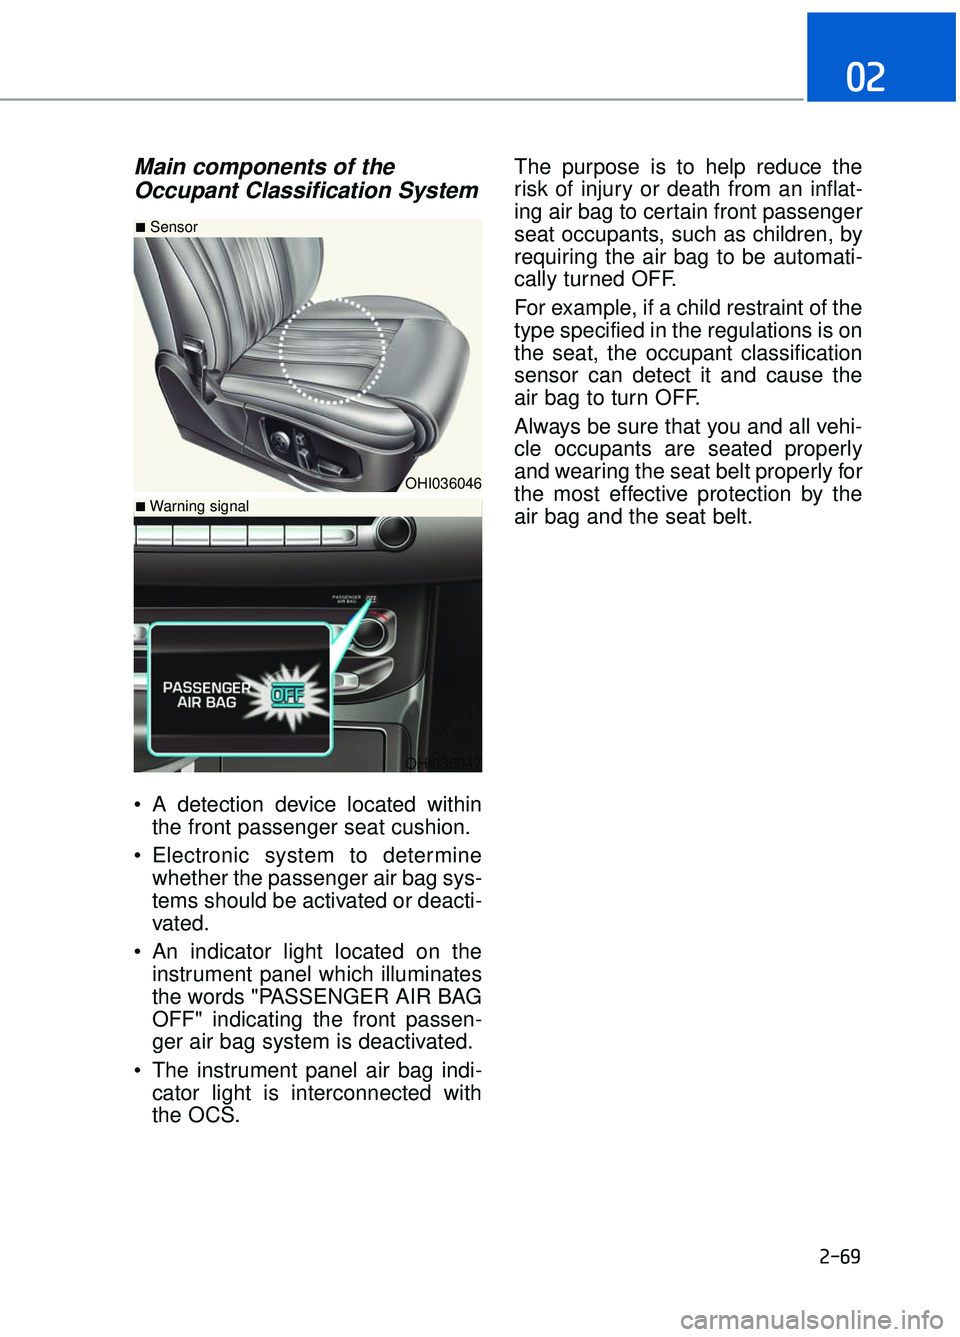 GENESIS G90 2017  Owners Manual 2-69
02
Main components of theOccupant Classification System   
 A detection device located within
the front passenger seat cushion.
 Electronic system to determine whether the passenger air bag sys-
